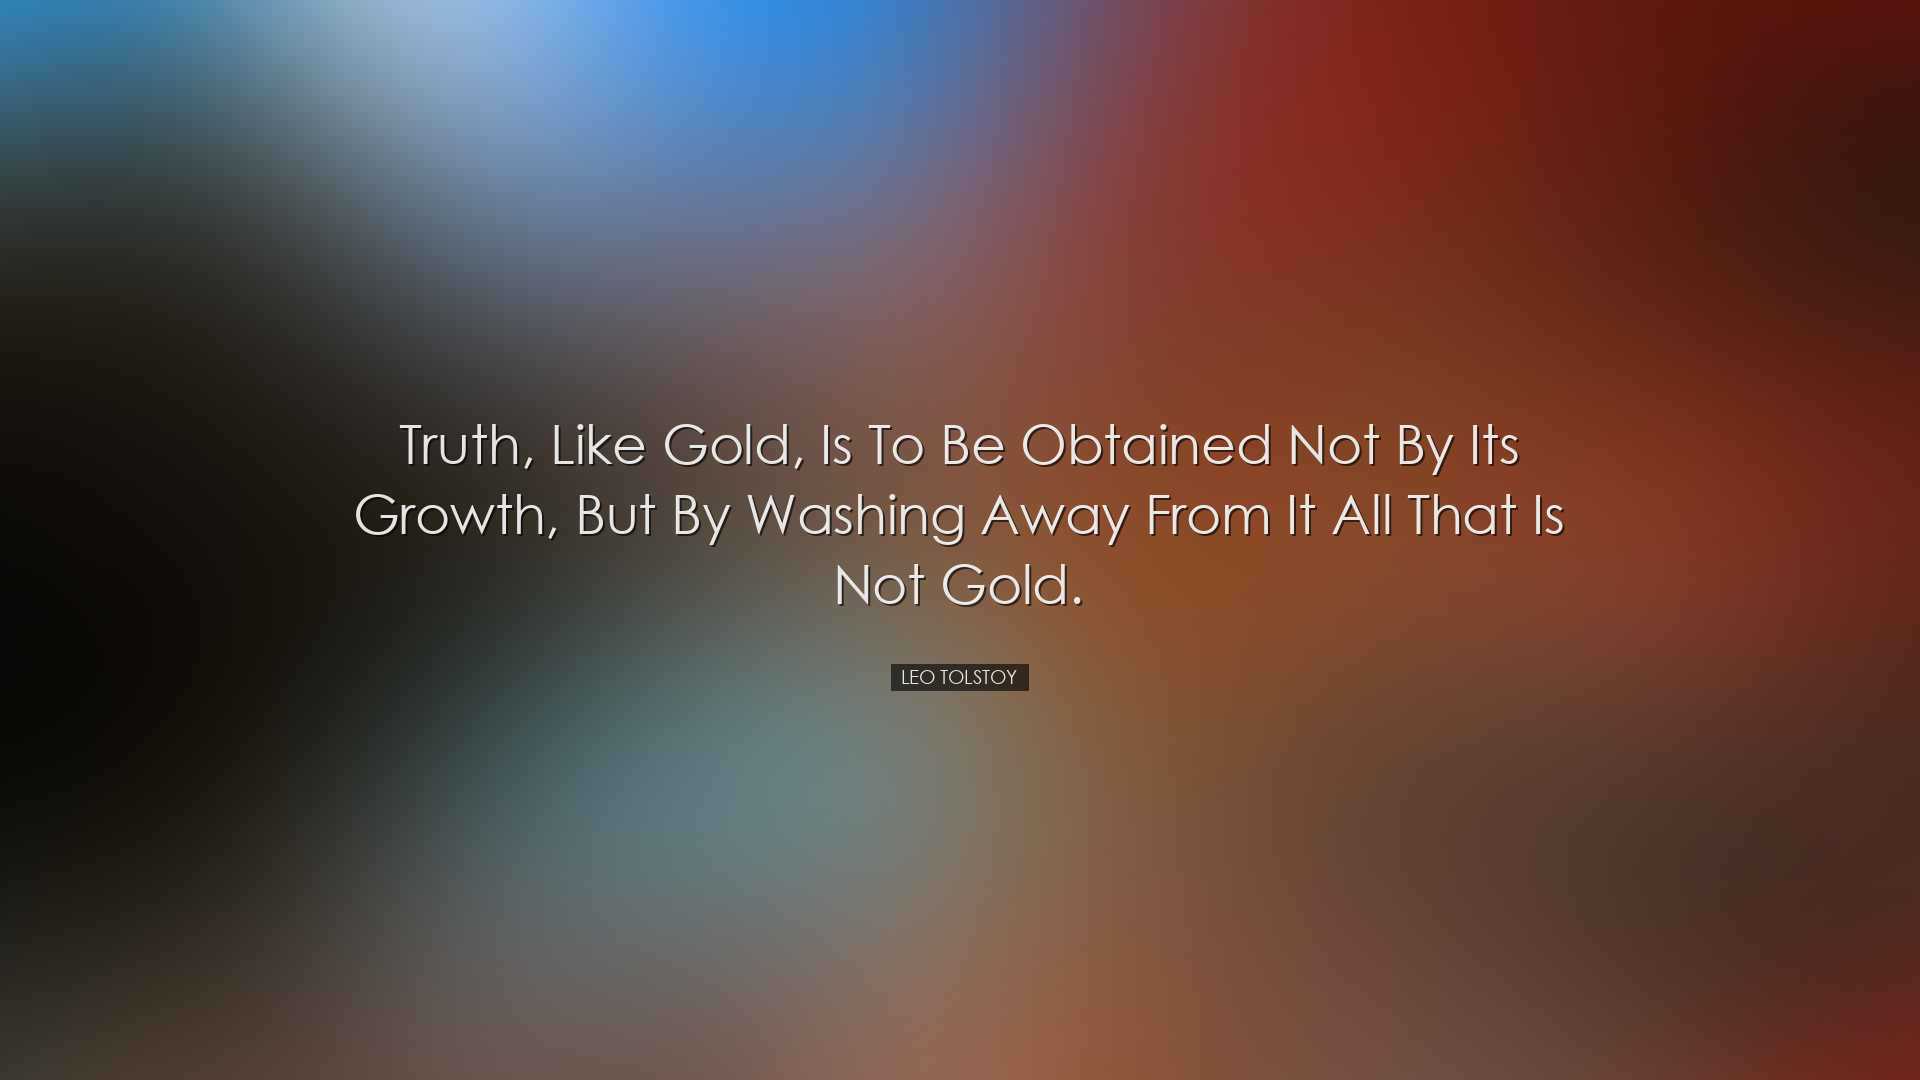 Truth, like gold, is to be obtained not by its growth, but by wash